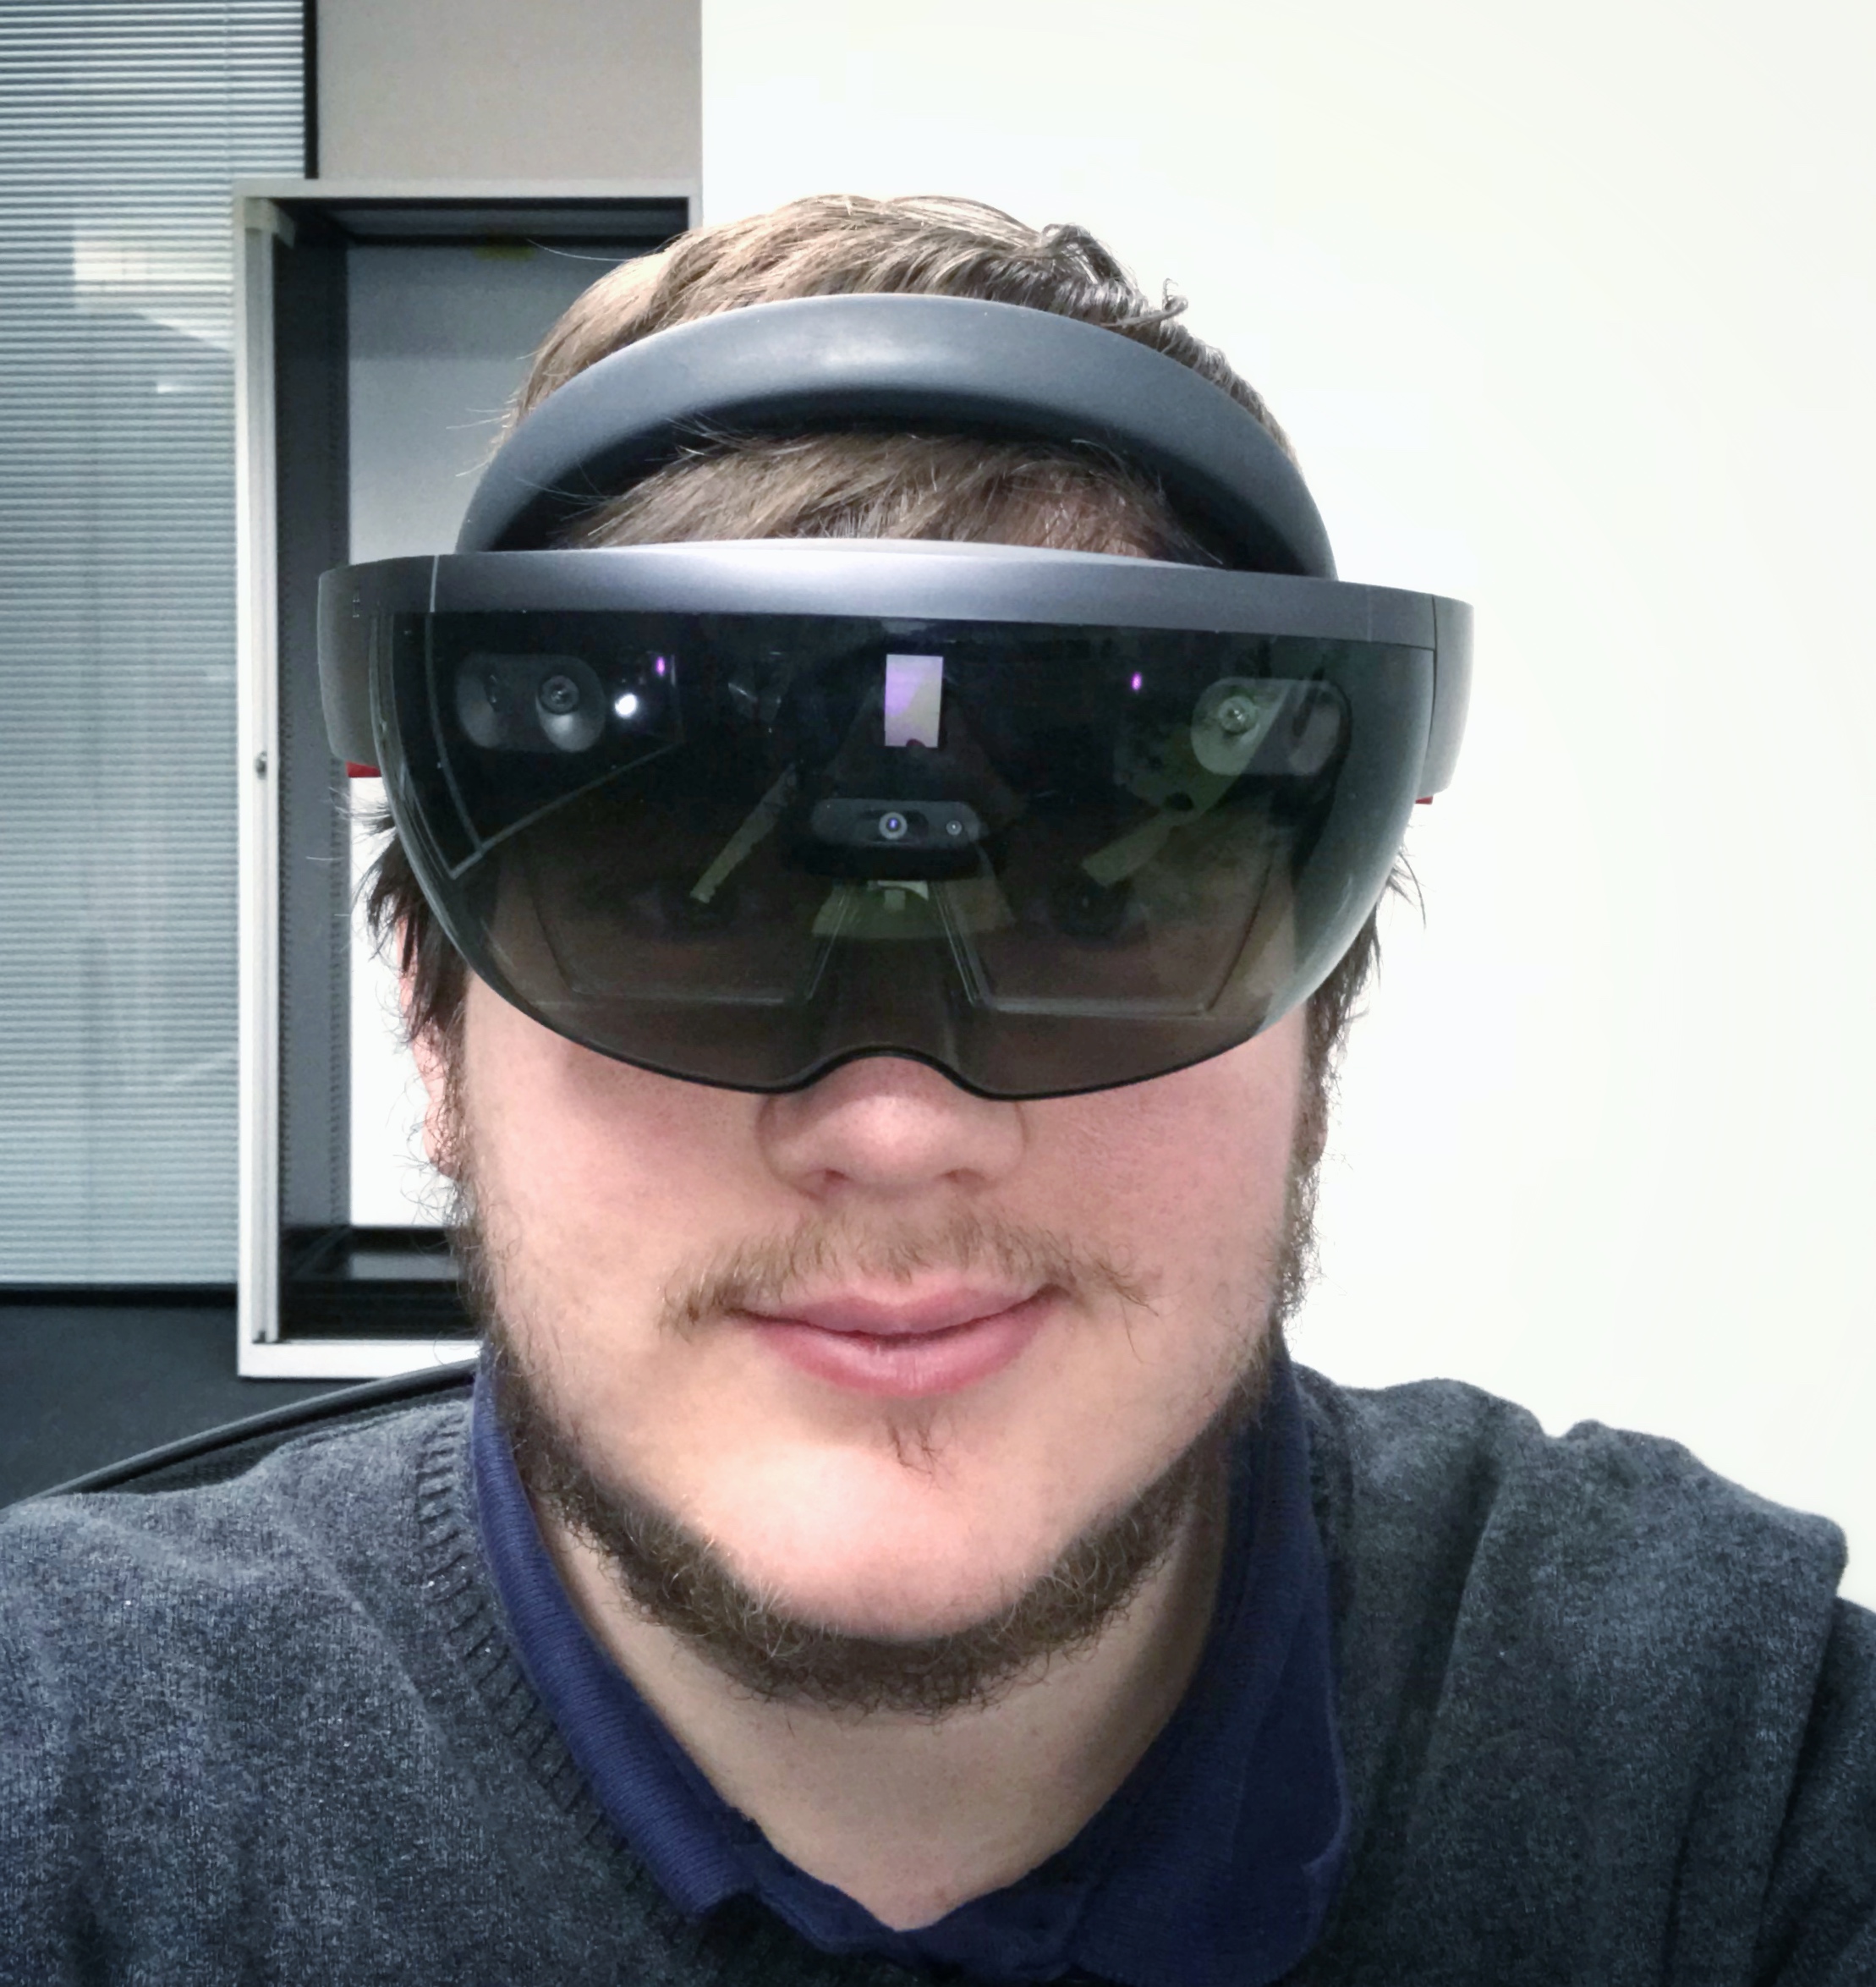 Selfie with the Hololens